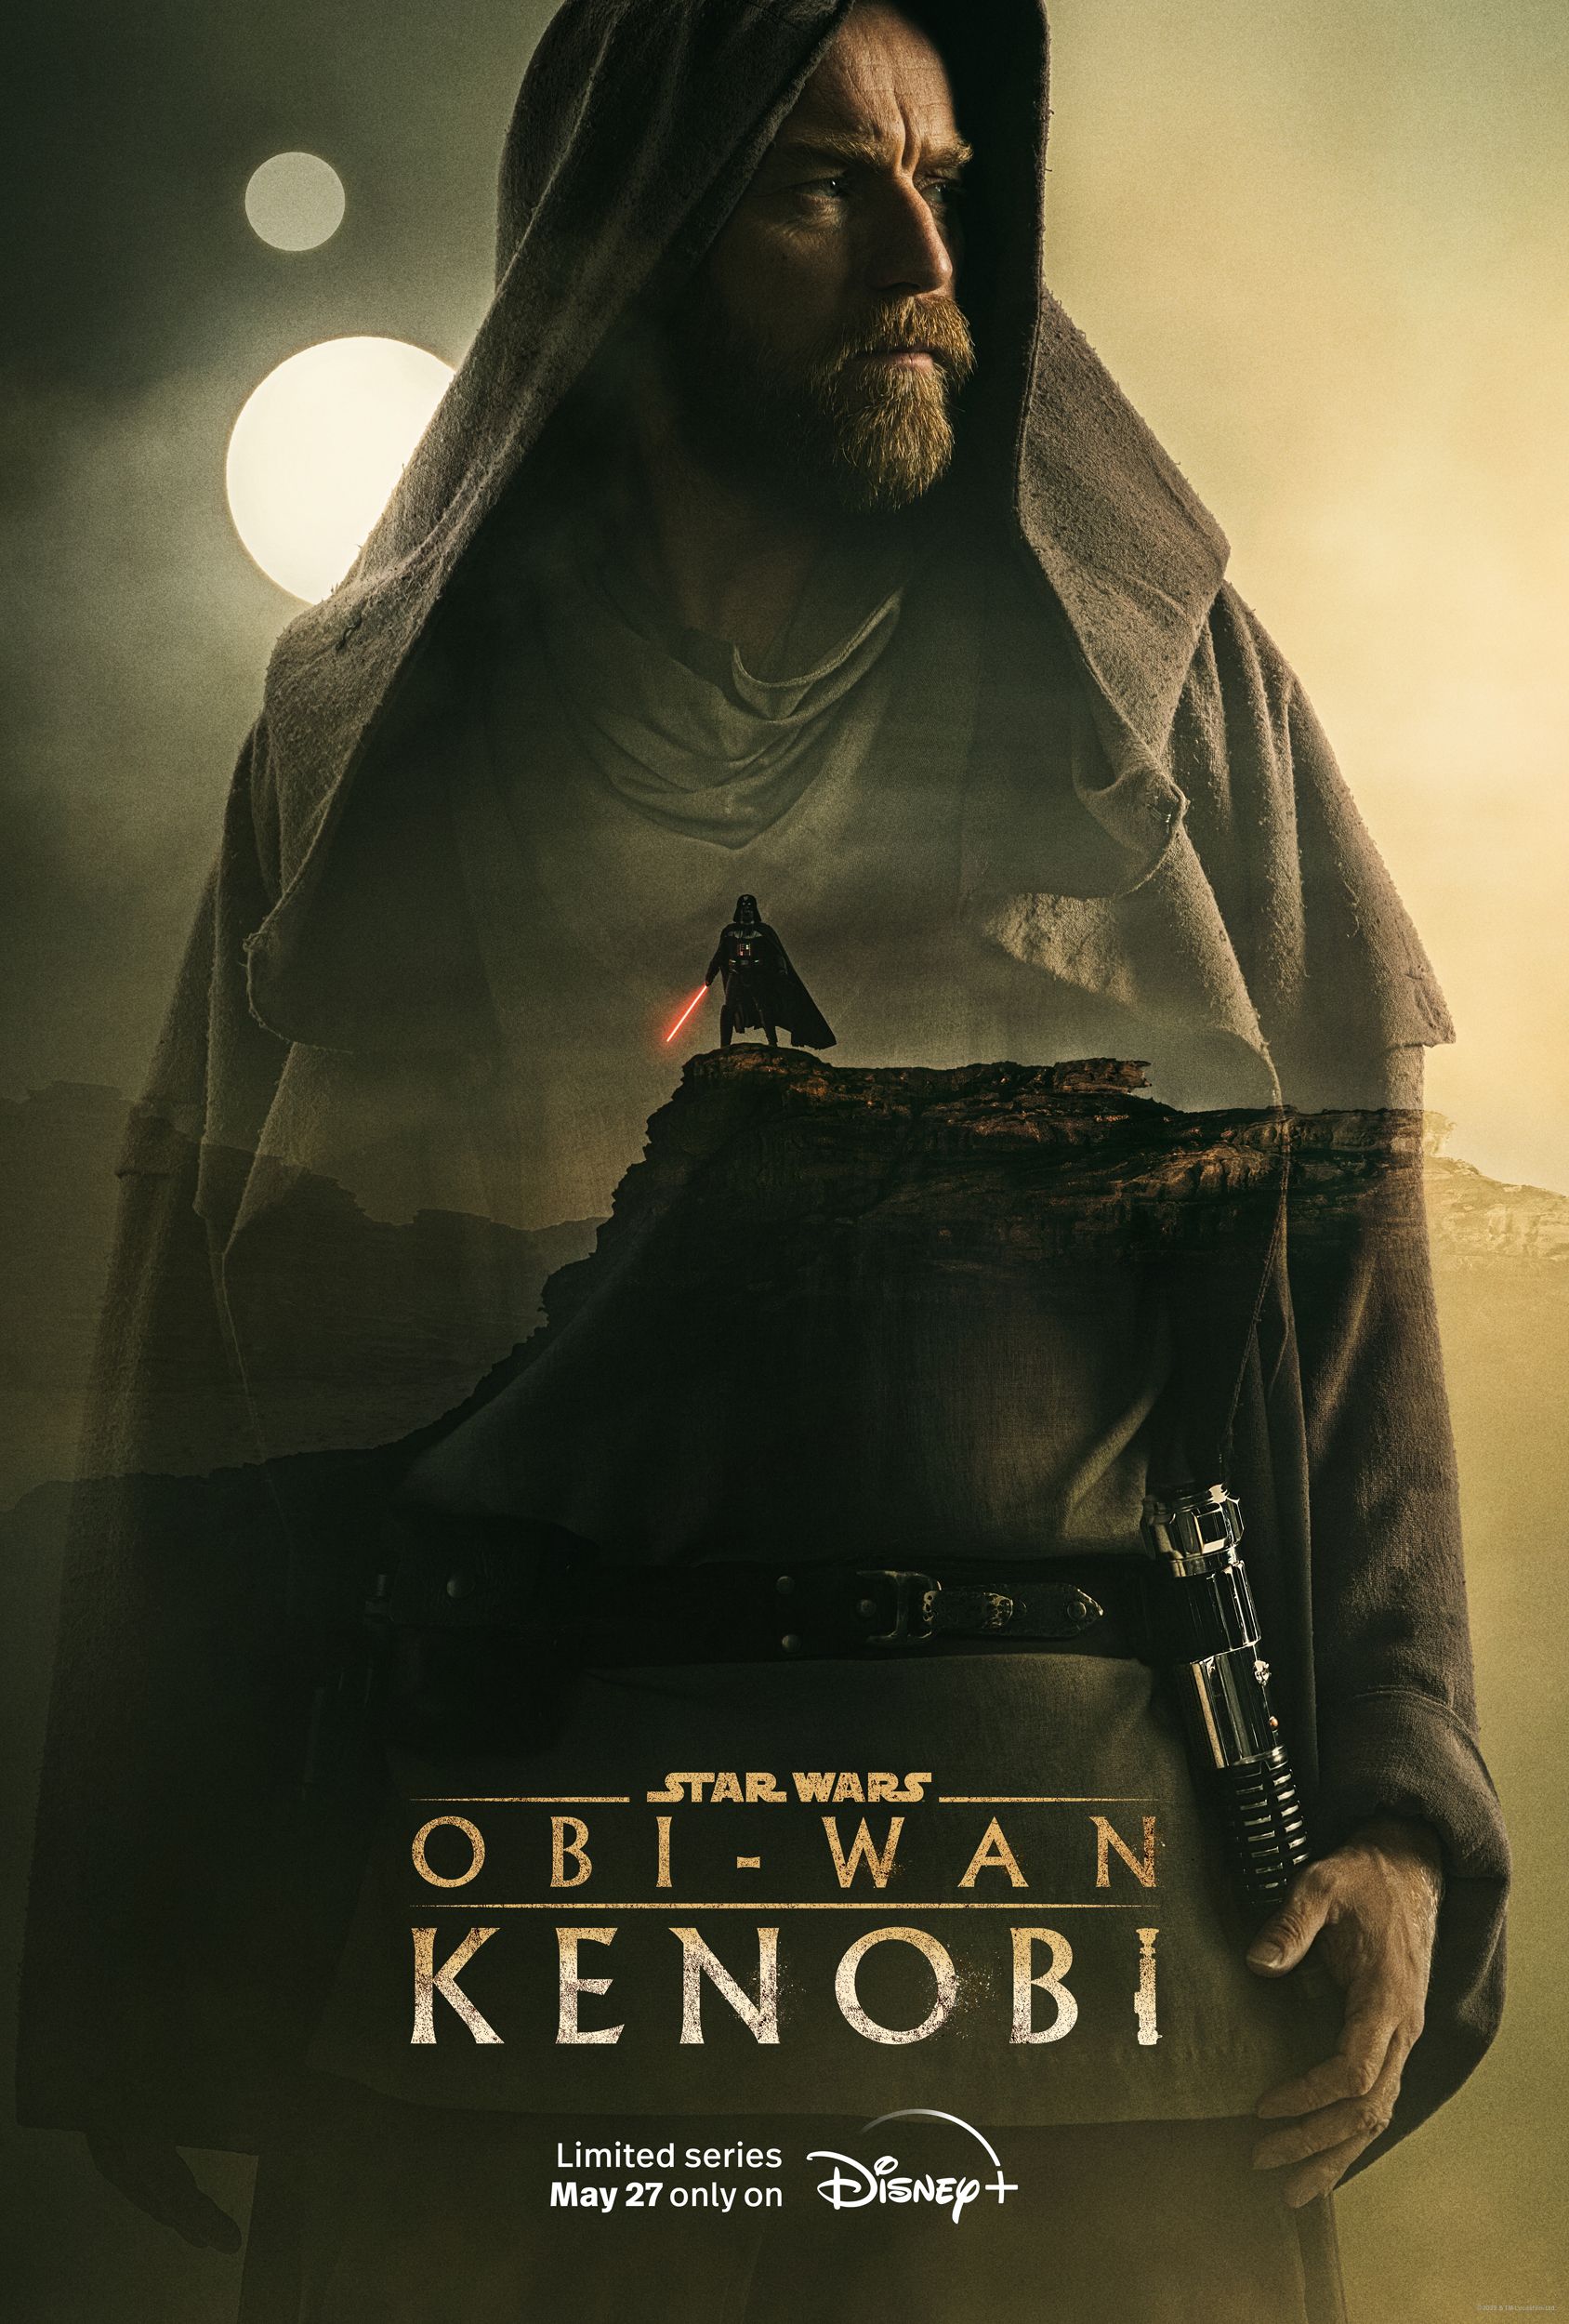 Latest Star Wars Blu-Ray Announcements Are Disappointing News For Obi-Wan Kenobi Season 2